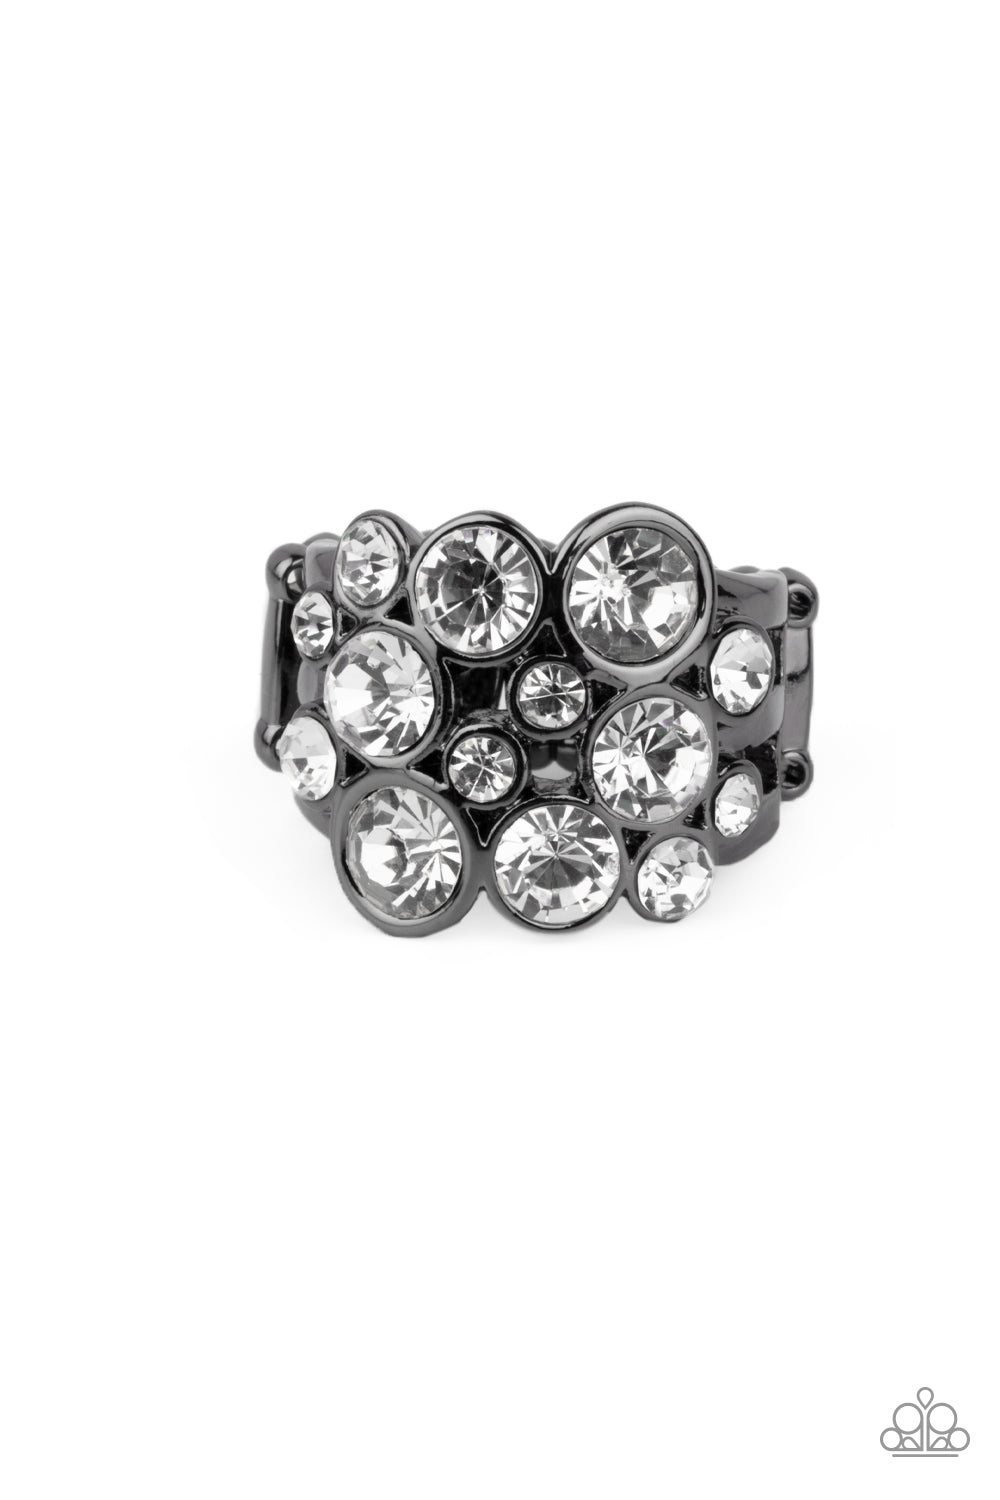 Bubbling Bravado Black Ring - Paparazzi Accessories.  Encased in sleek gunmetal frames, a bubbly collection of sparkly white rhinestones coalesces into a glamorous band across the finger. Features a stretchy band for a flexible fit.  ﻿﻿﻿All Paparazzi Accessories are lead free and nickel free!  Sold as one individual ring.